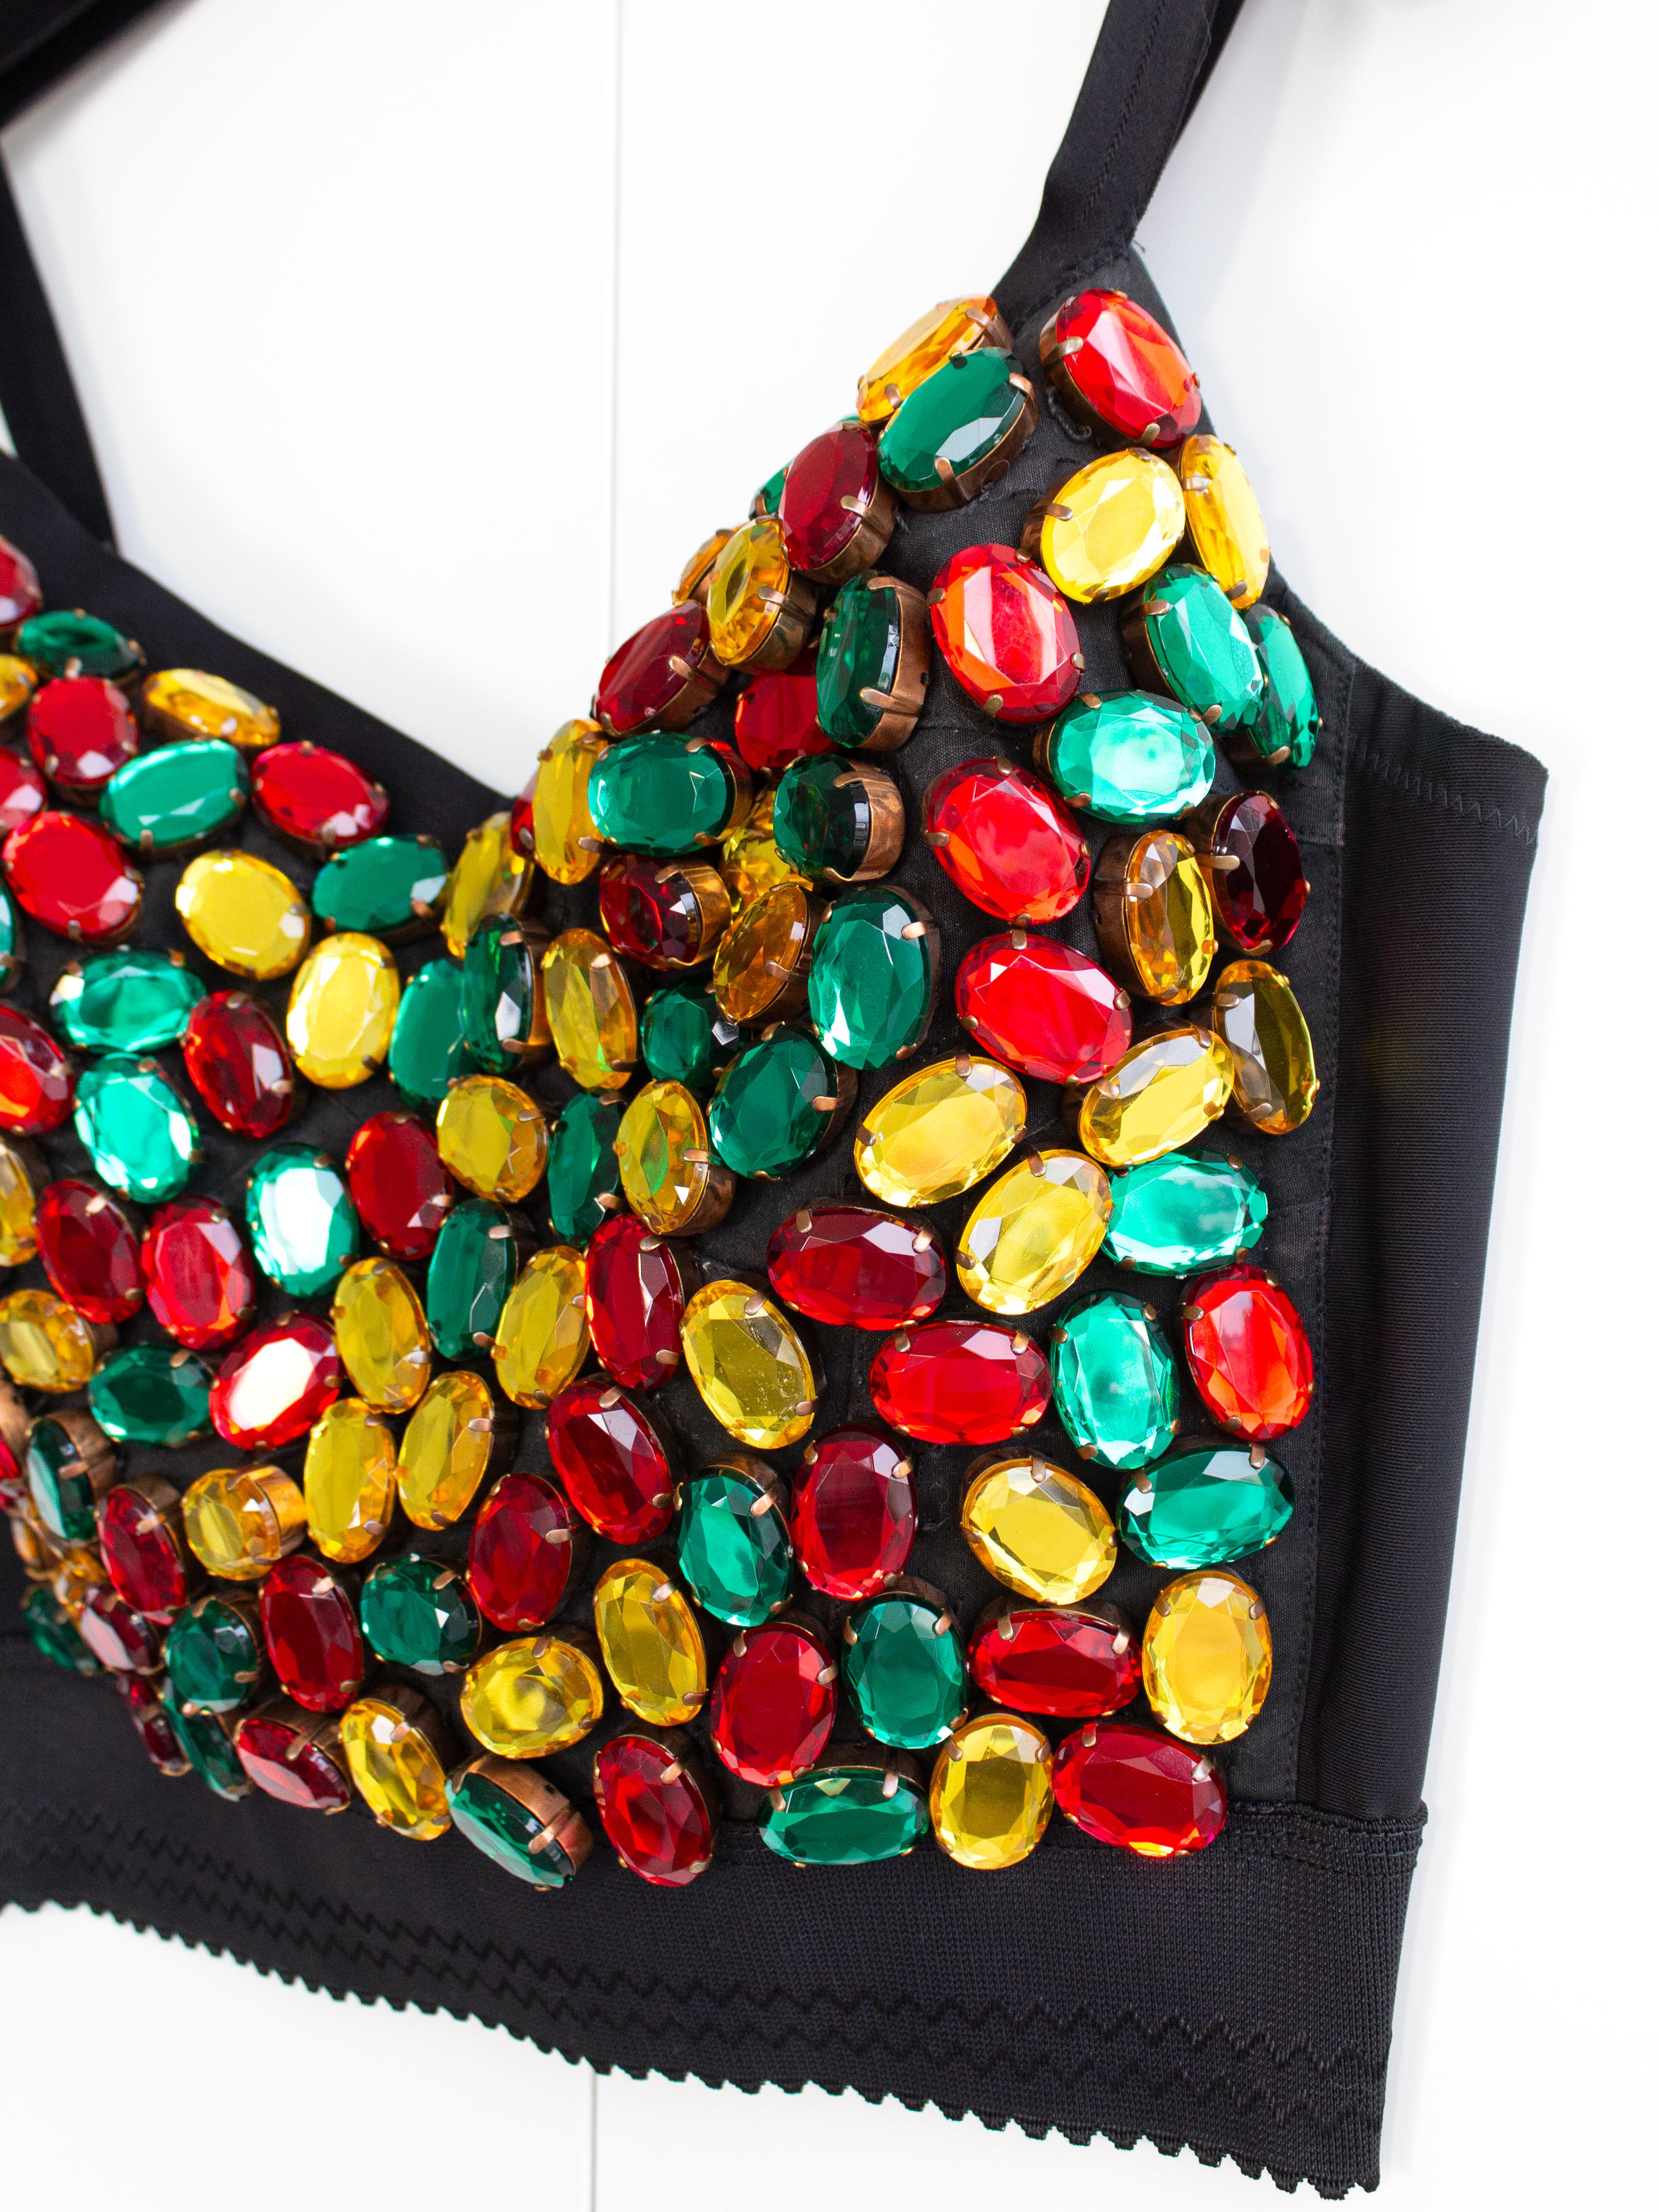 Dolce&Gabbana Vintage 1990s Rainbow Multicolor Crystal Candy Black Bustier Top For Sale 3